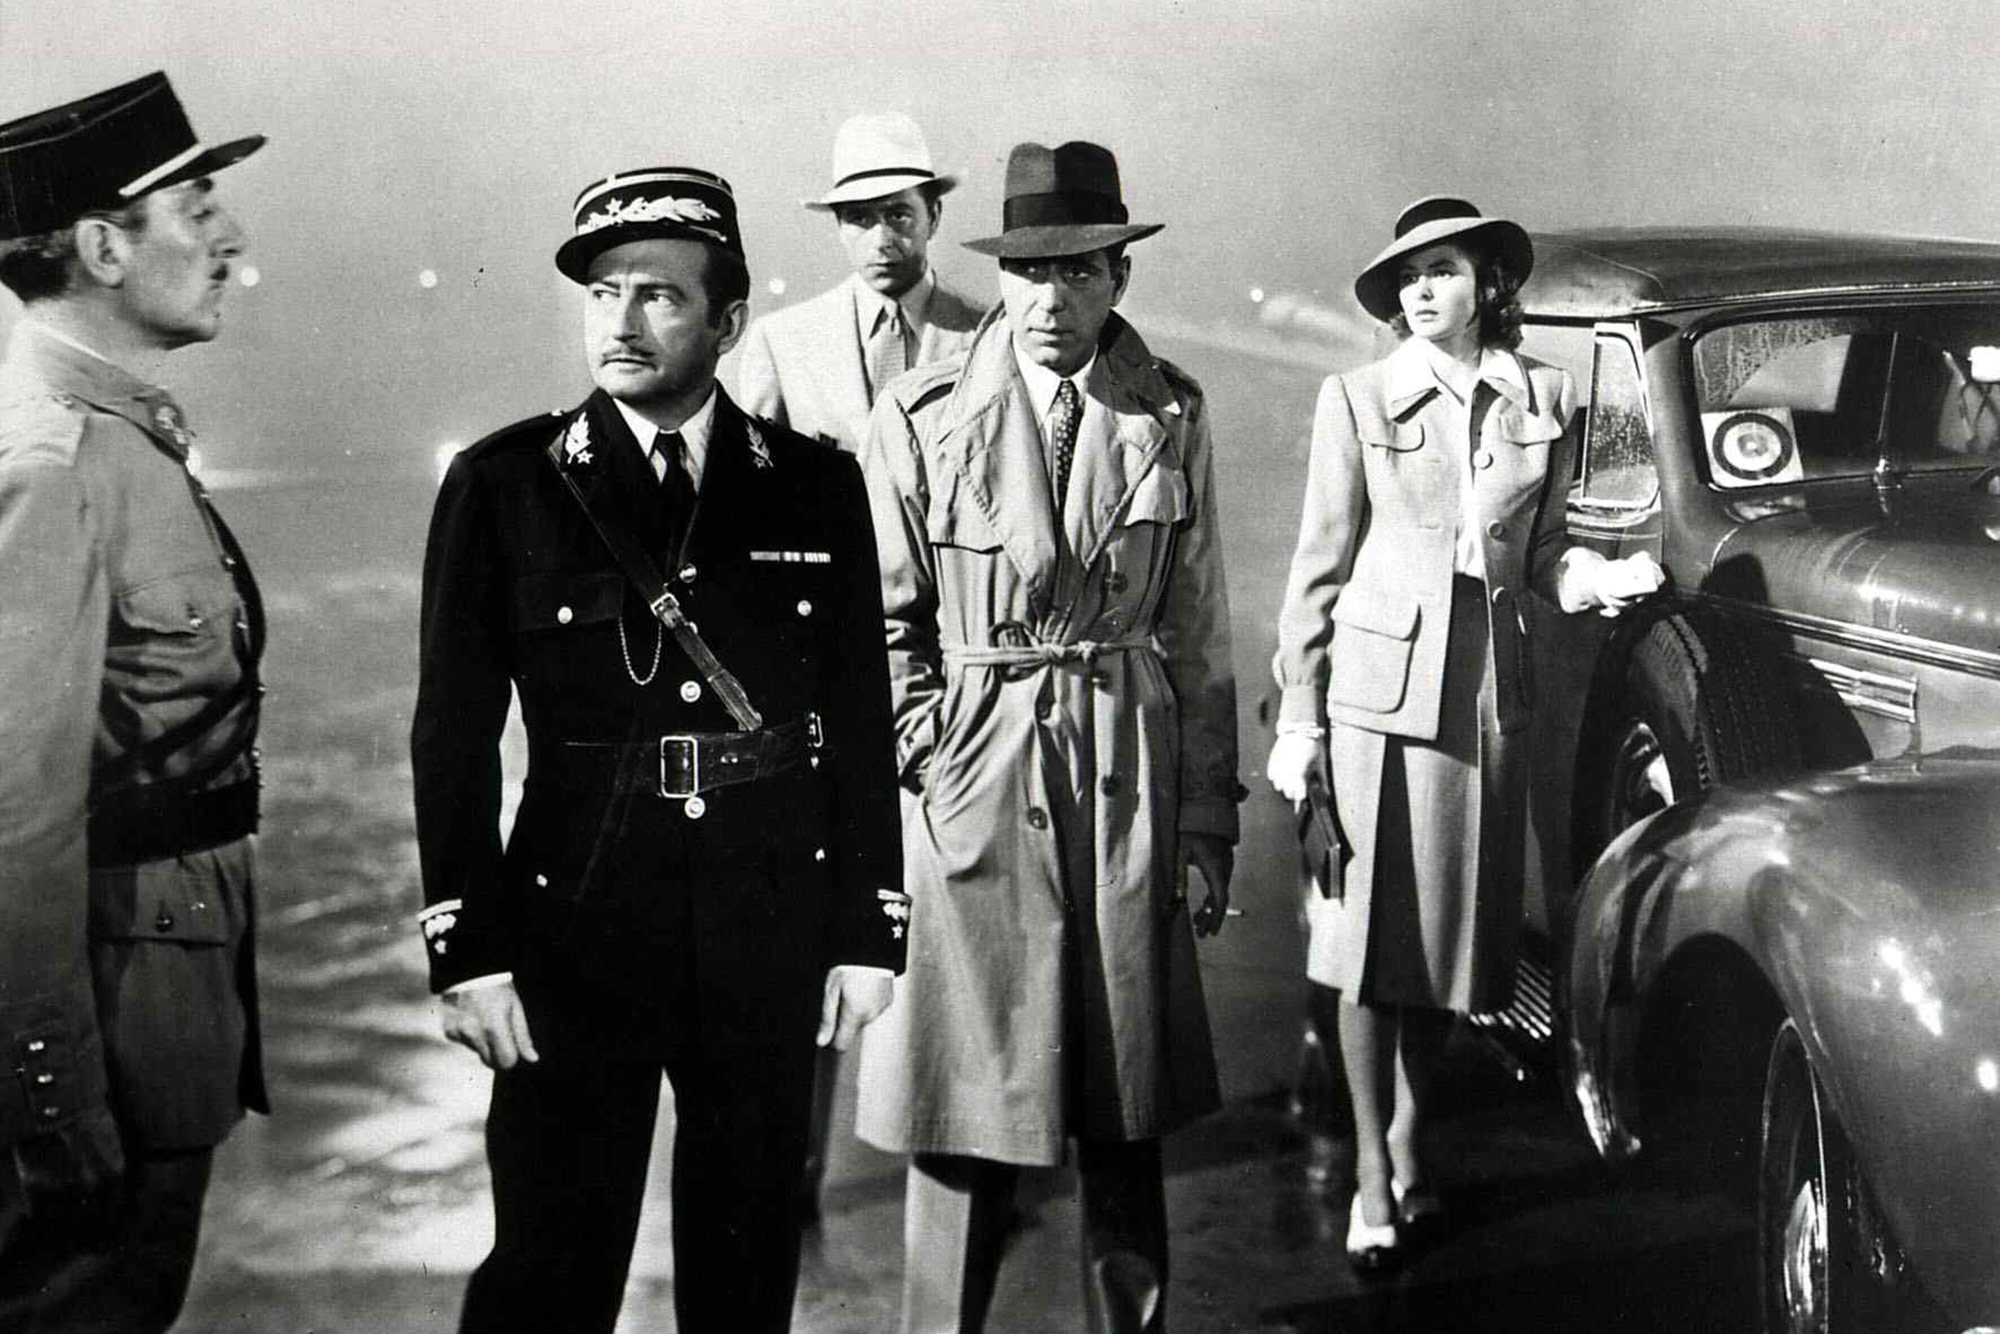 Black and white still from the film “Casablanca.” In the culminating scene, Jean del Val, Claude Rains, Paul Henreid, Humphrey Bogart, and Ingrid Bergman are seen. The men wear trench coats and hats, and the officers wear uniforms.